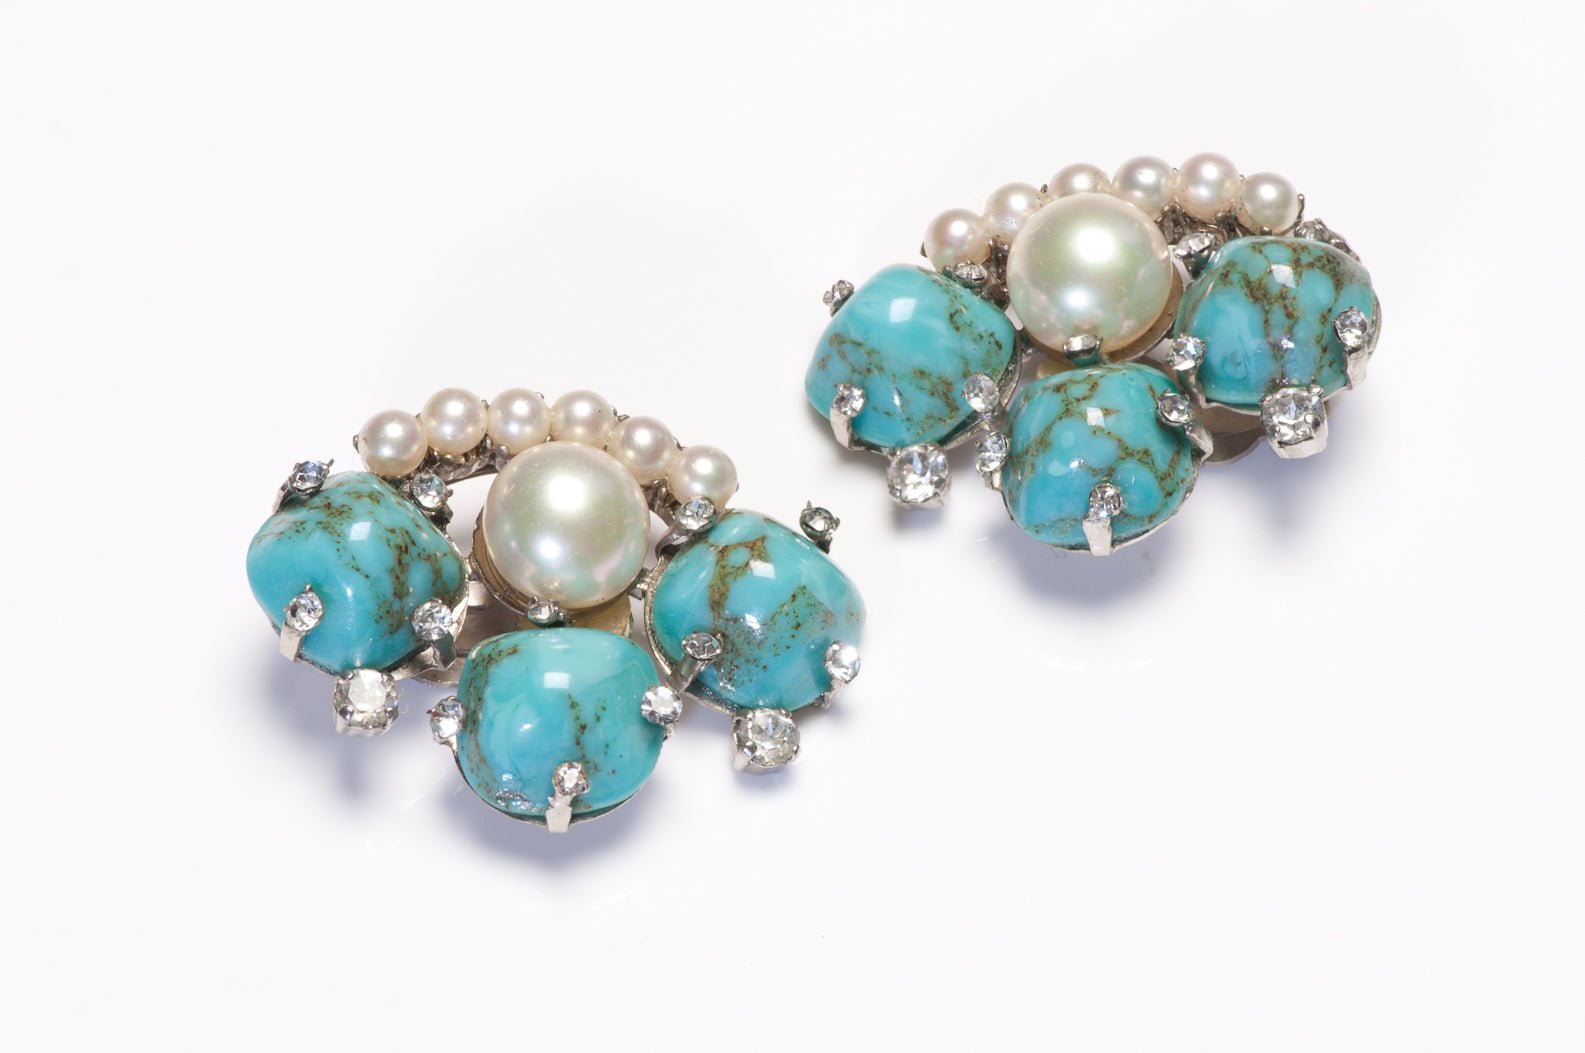 Vintage 1980's French Turquoise Cabochon Glass Pearl Crystal Earrings